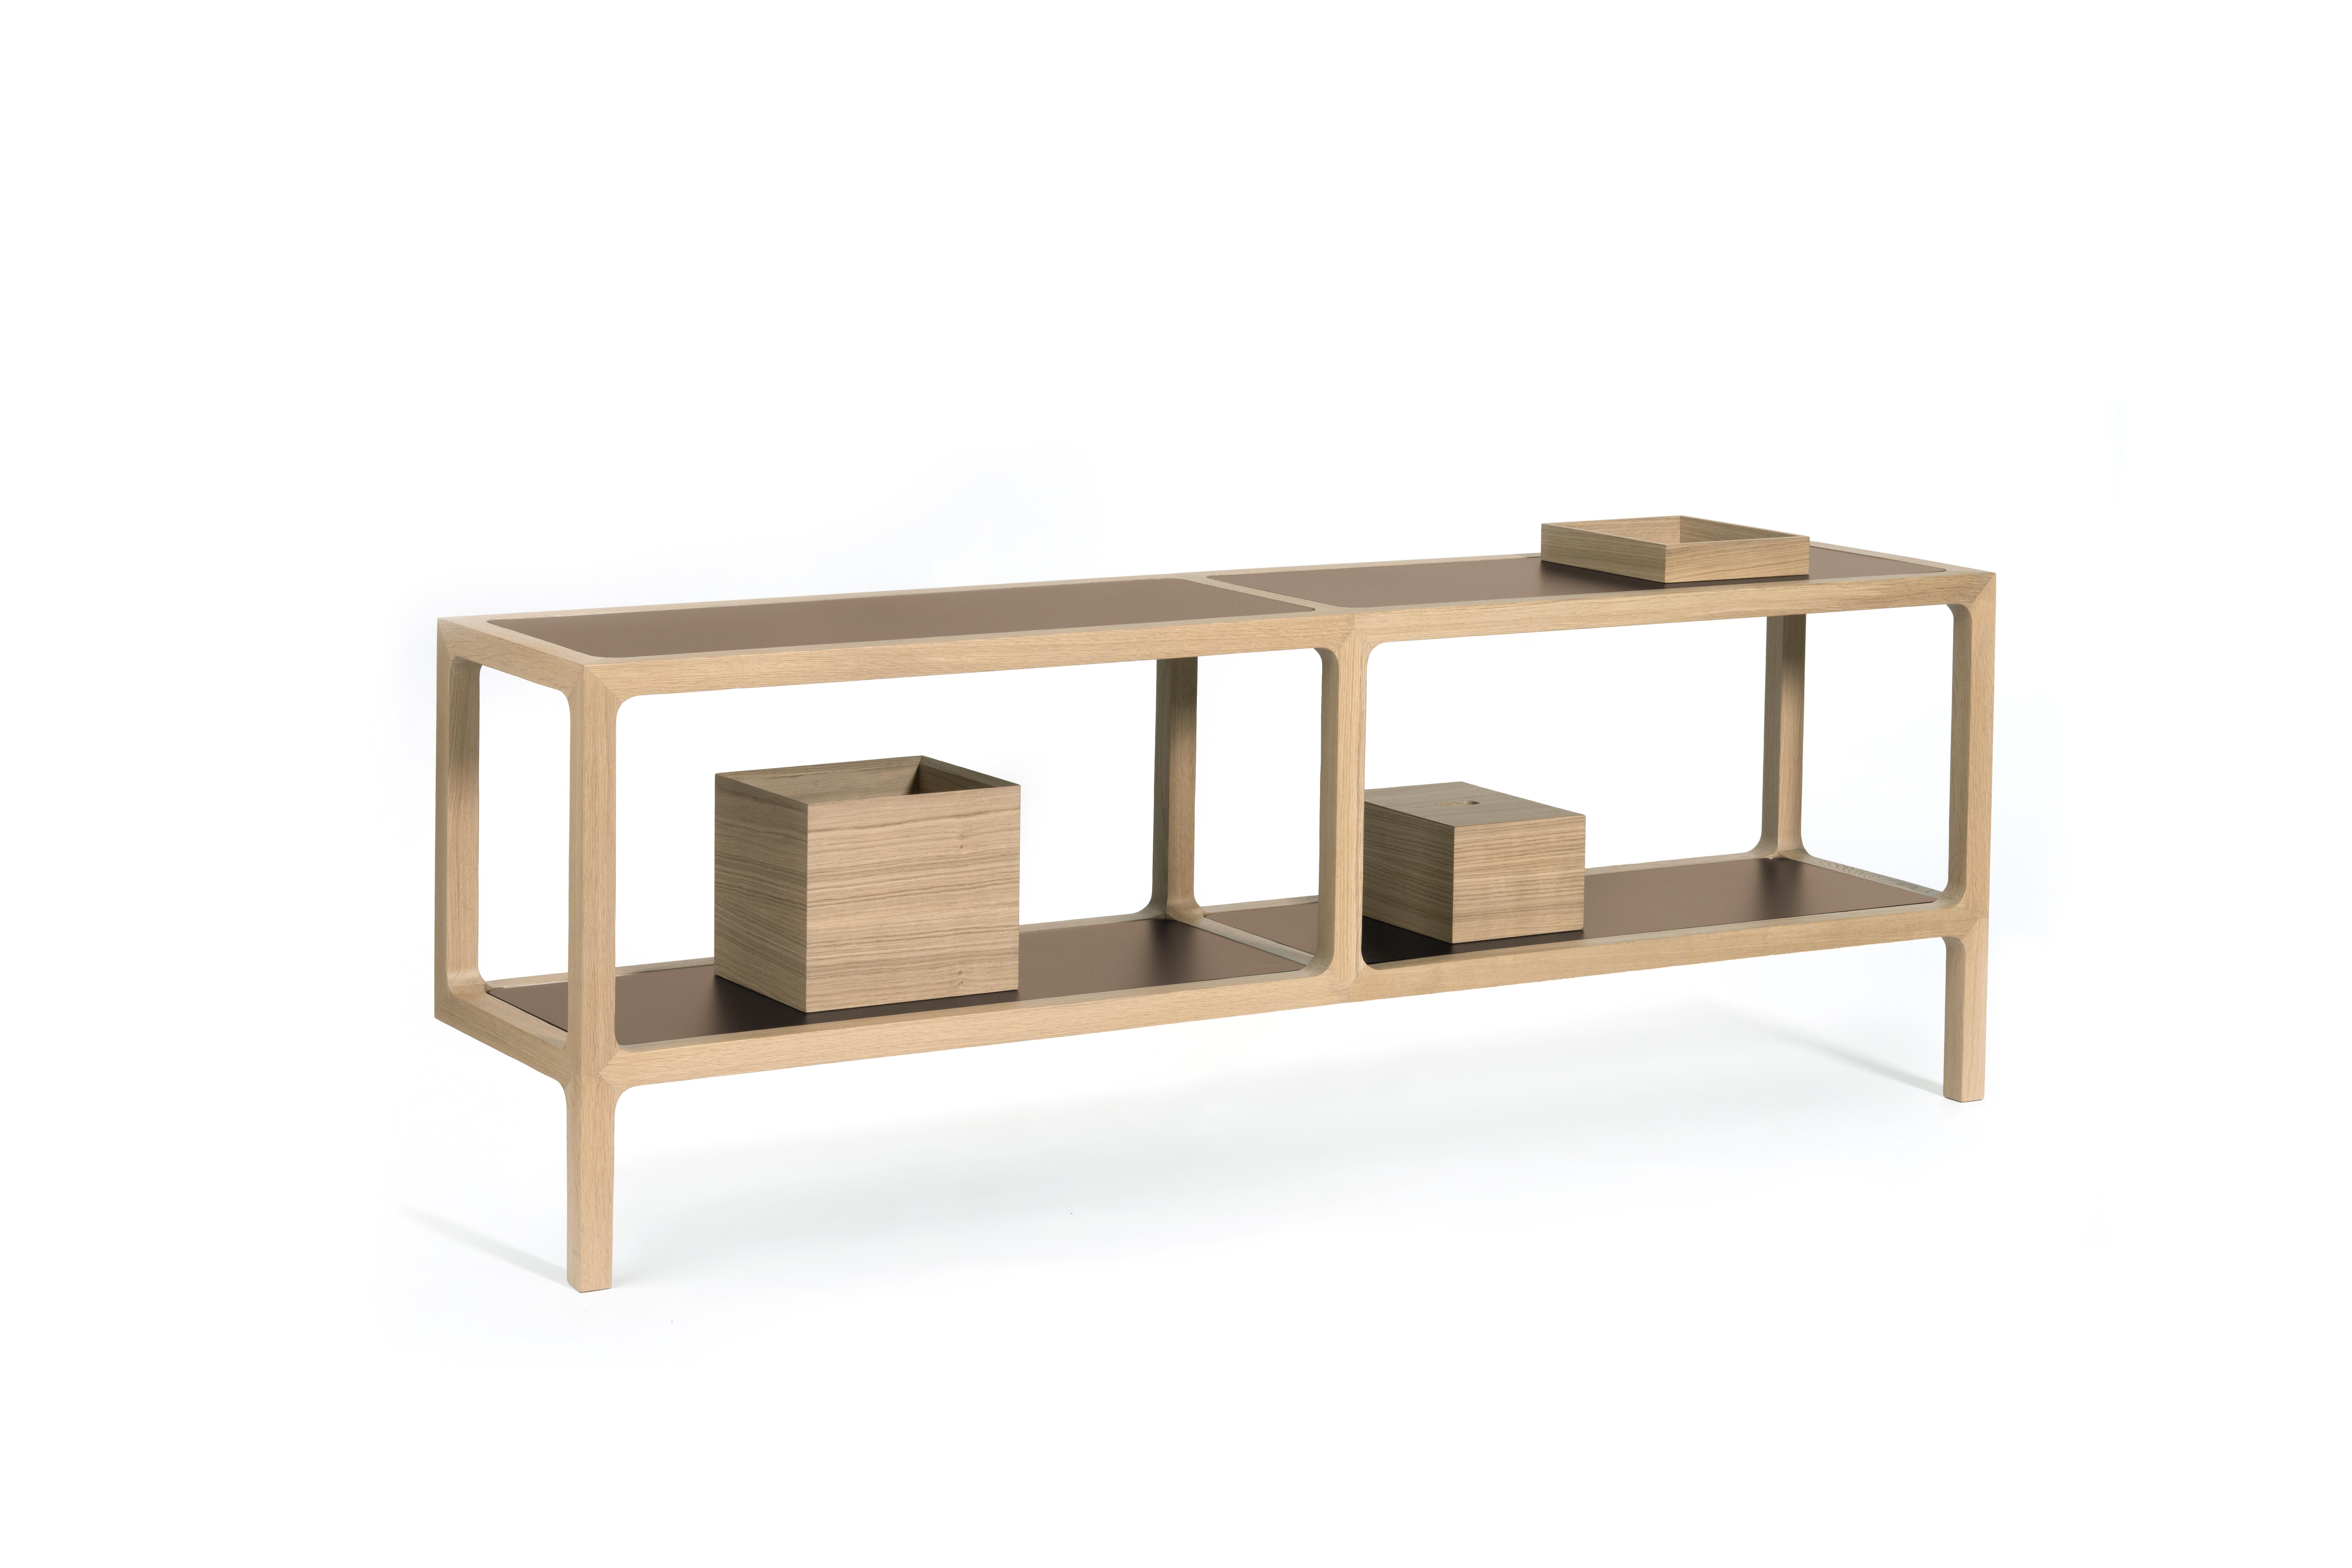 More box 15 by Mentemano.
Dimensions: W20 x D 28 x H 15 cm.
Materials: oak.


A tray and two boxes available in two dimensions with cover, made of wood with bronze mirror inserts as possible option.


Mentemano is a design concept brand